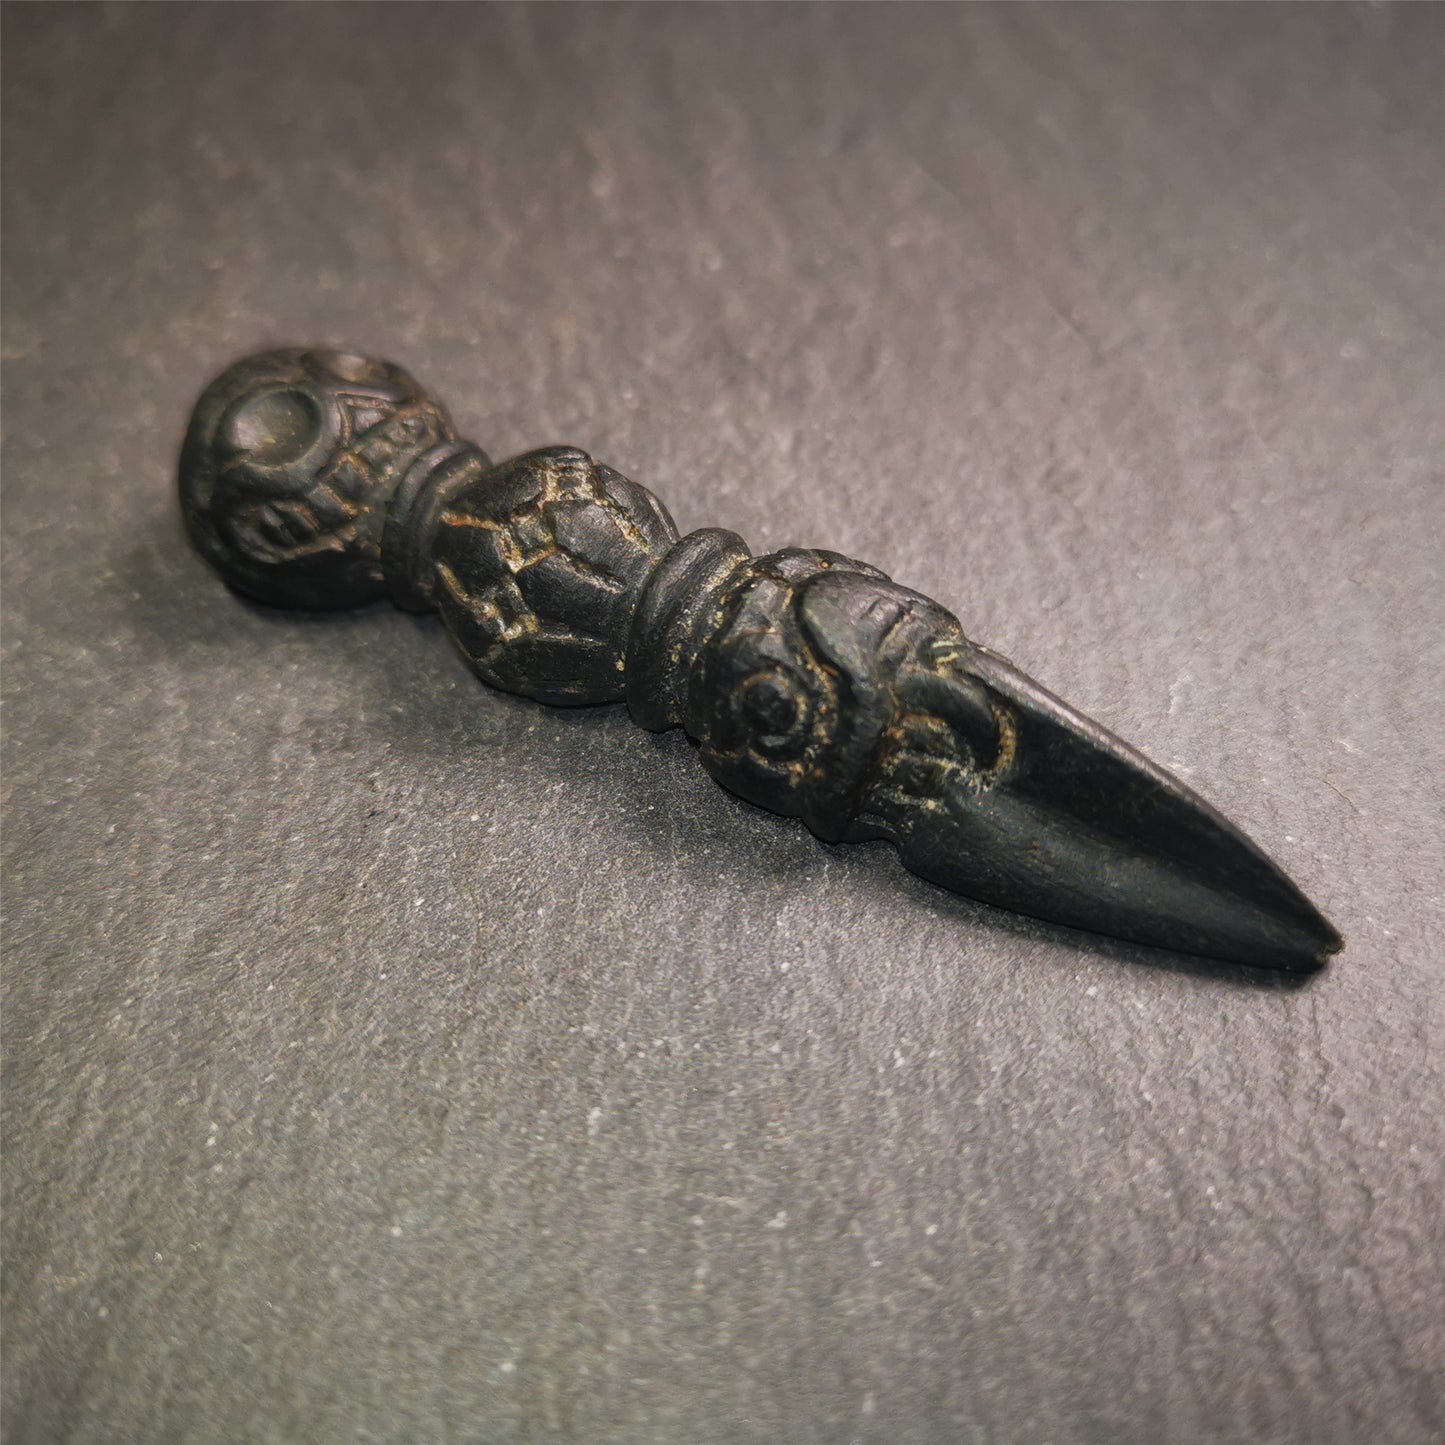 Gandhanra Unique Tibetan Buddhist Ritual Implement - Kila -Dorje Phurba,it was hand carved of natural Obsidian,total 2.83" inches.The top is Shmashana Adhipati skull shape, the middle is half vajra and the bottom is phurba